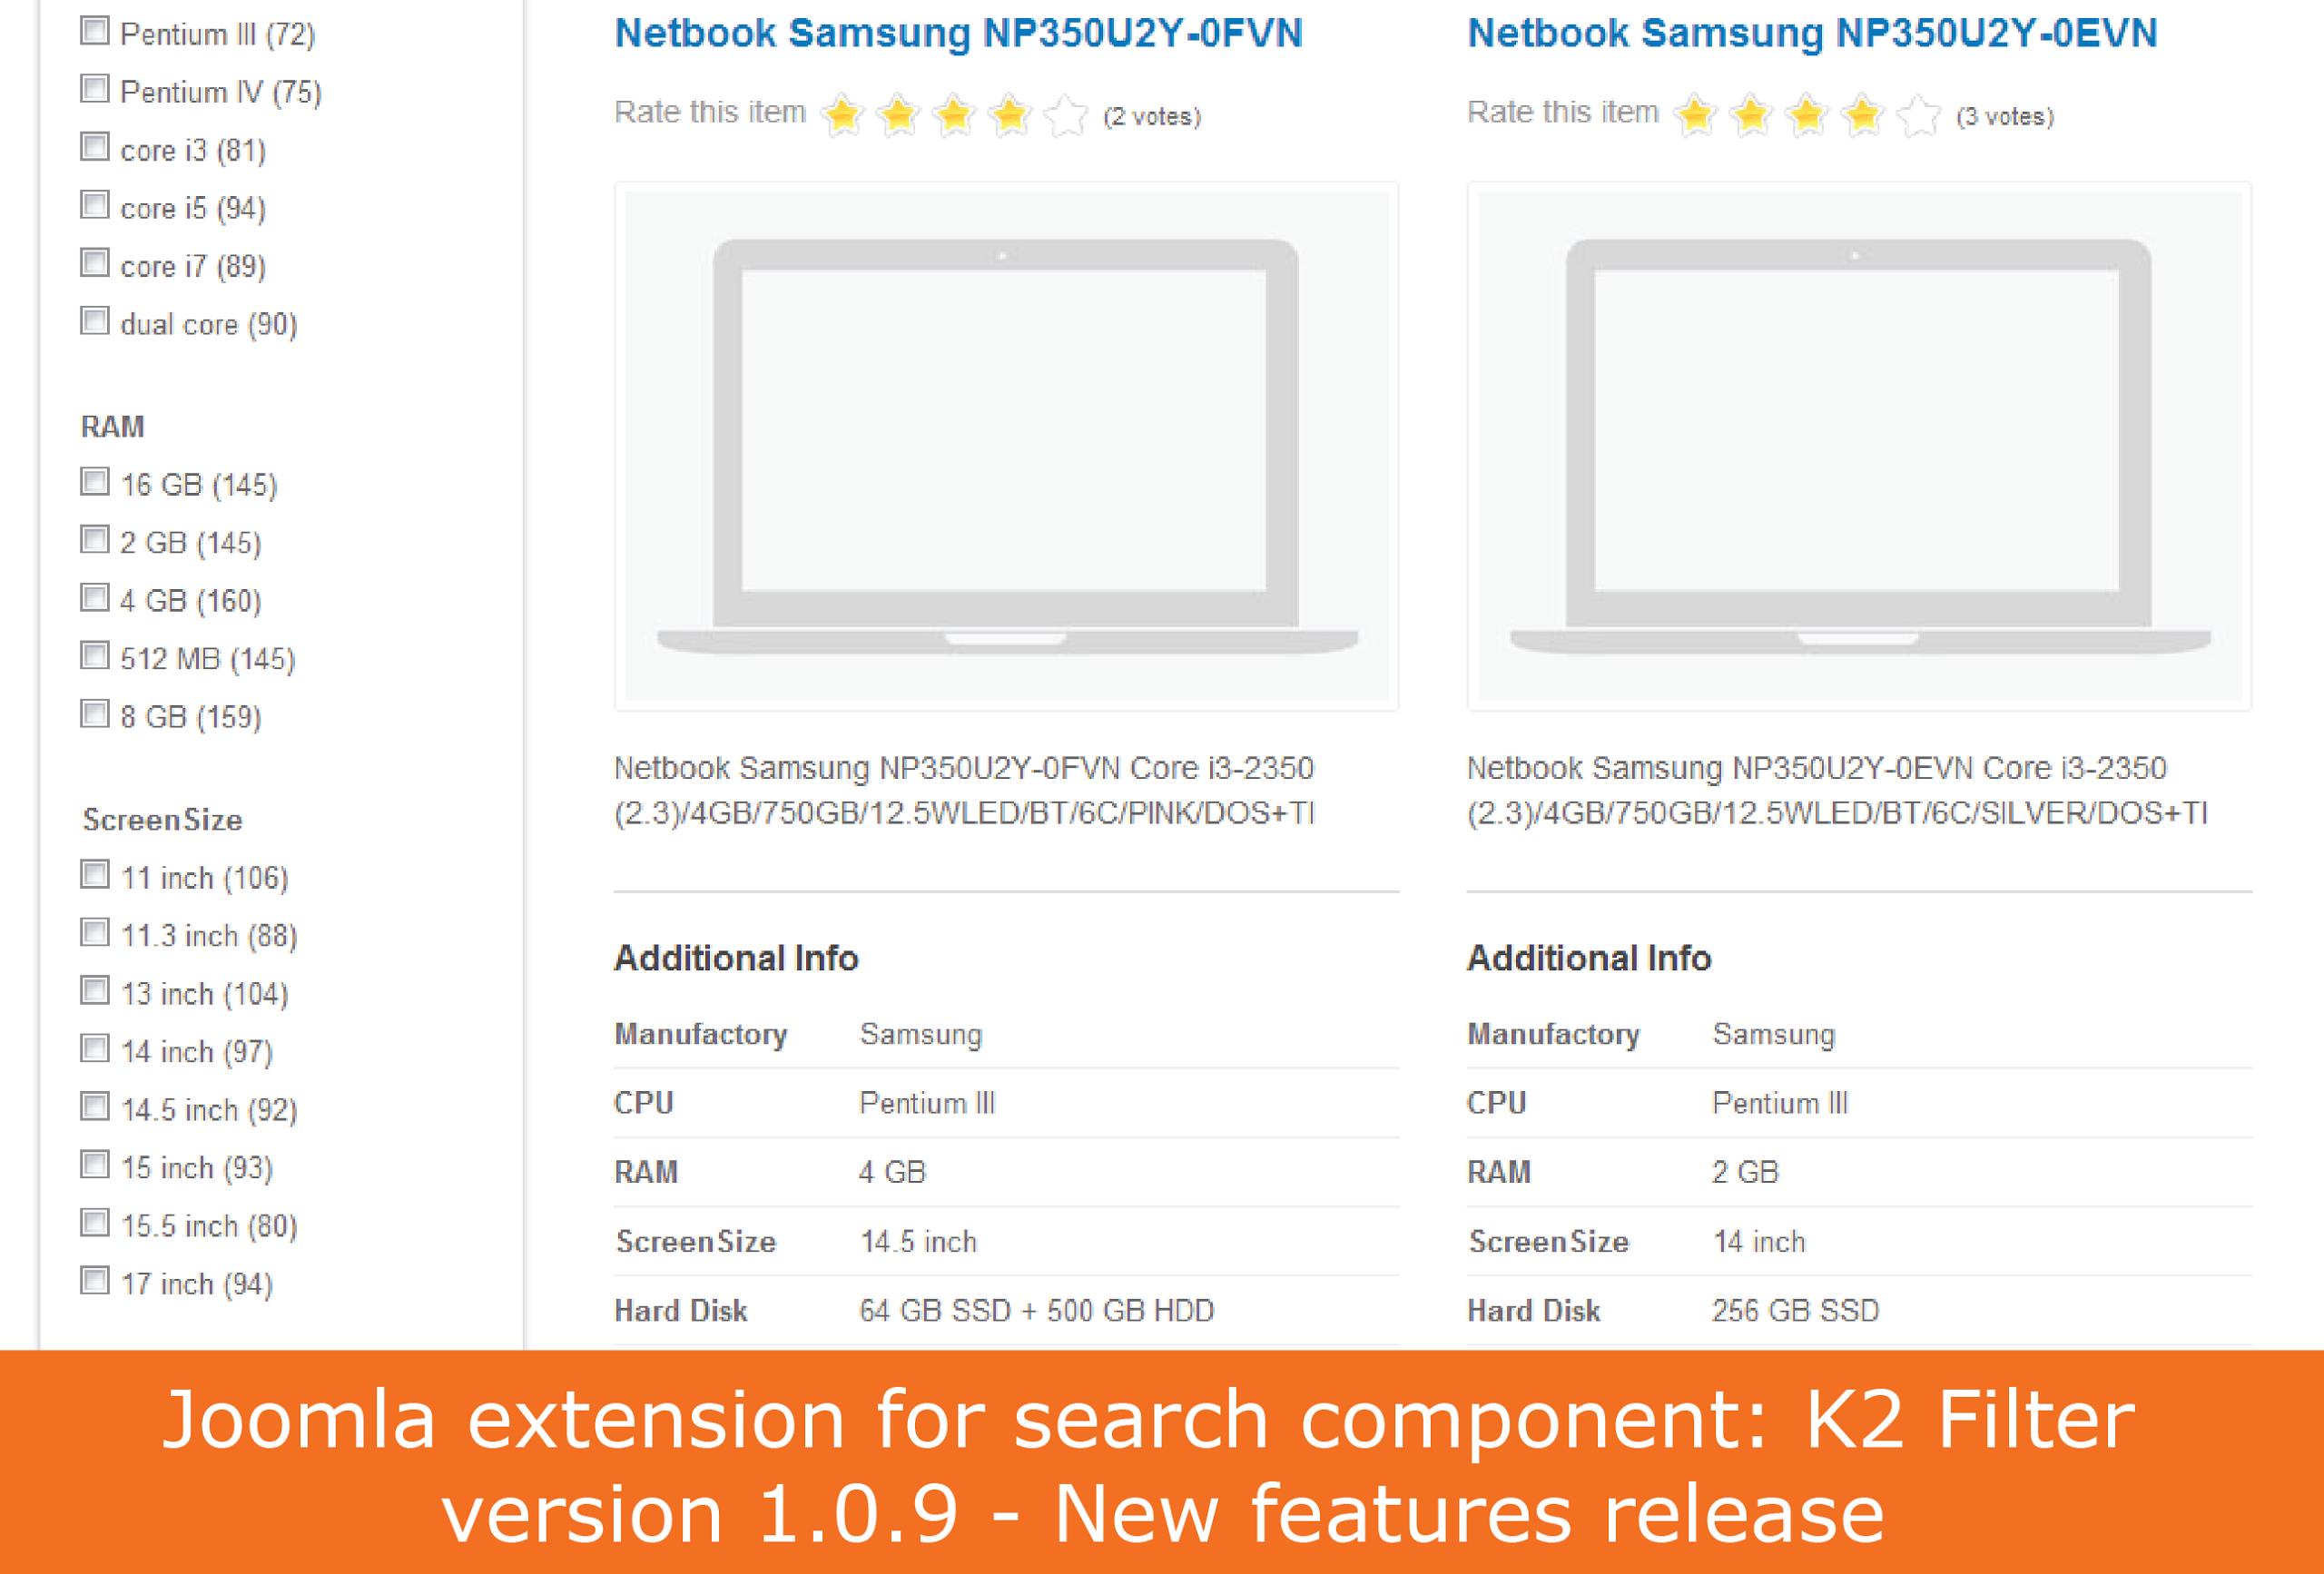 Joomla extension for search component: K2 Filter version 1.0.9 - New features release